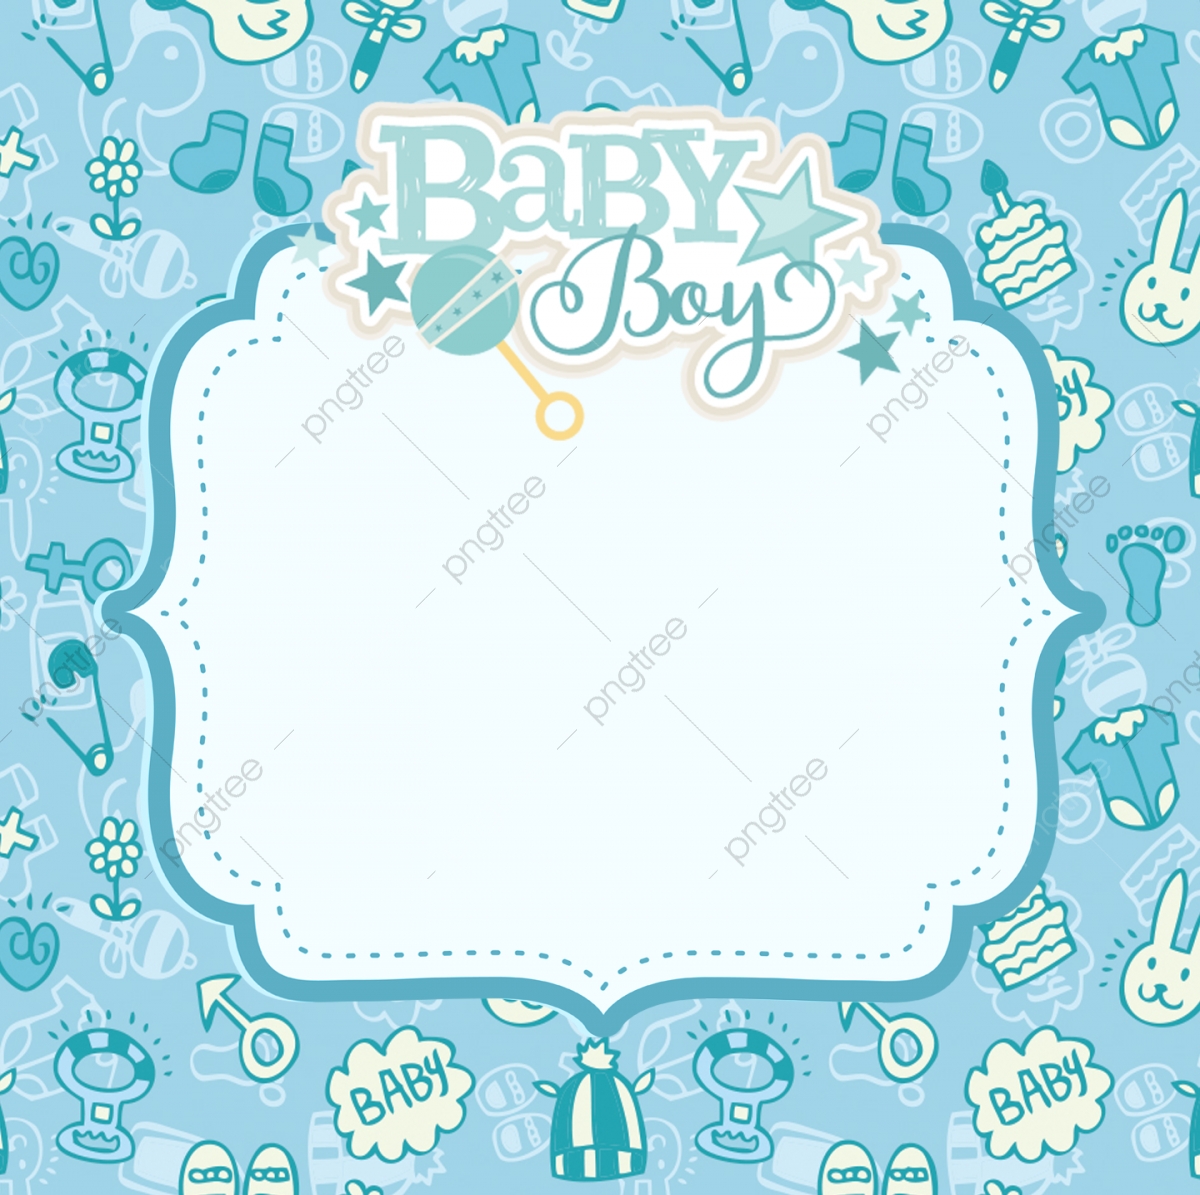 Baby Boy Png Backgrounds & Free Baby Boy Backgrounds.png.